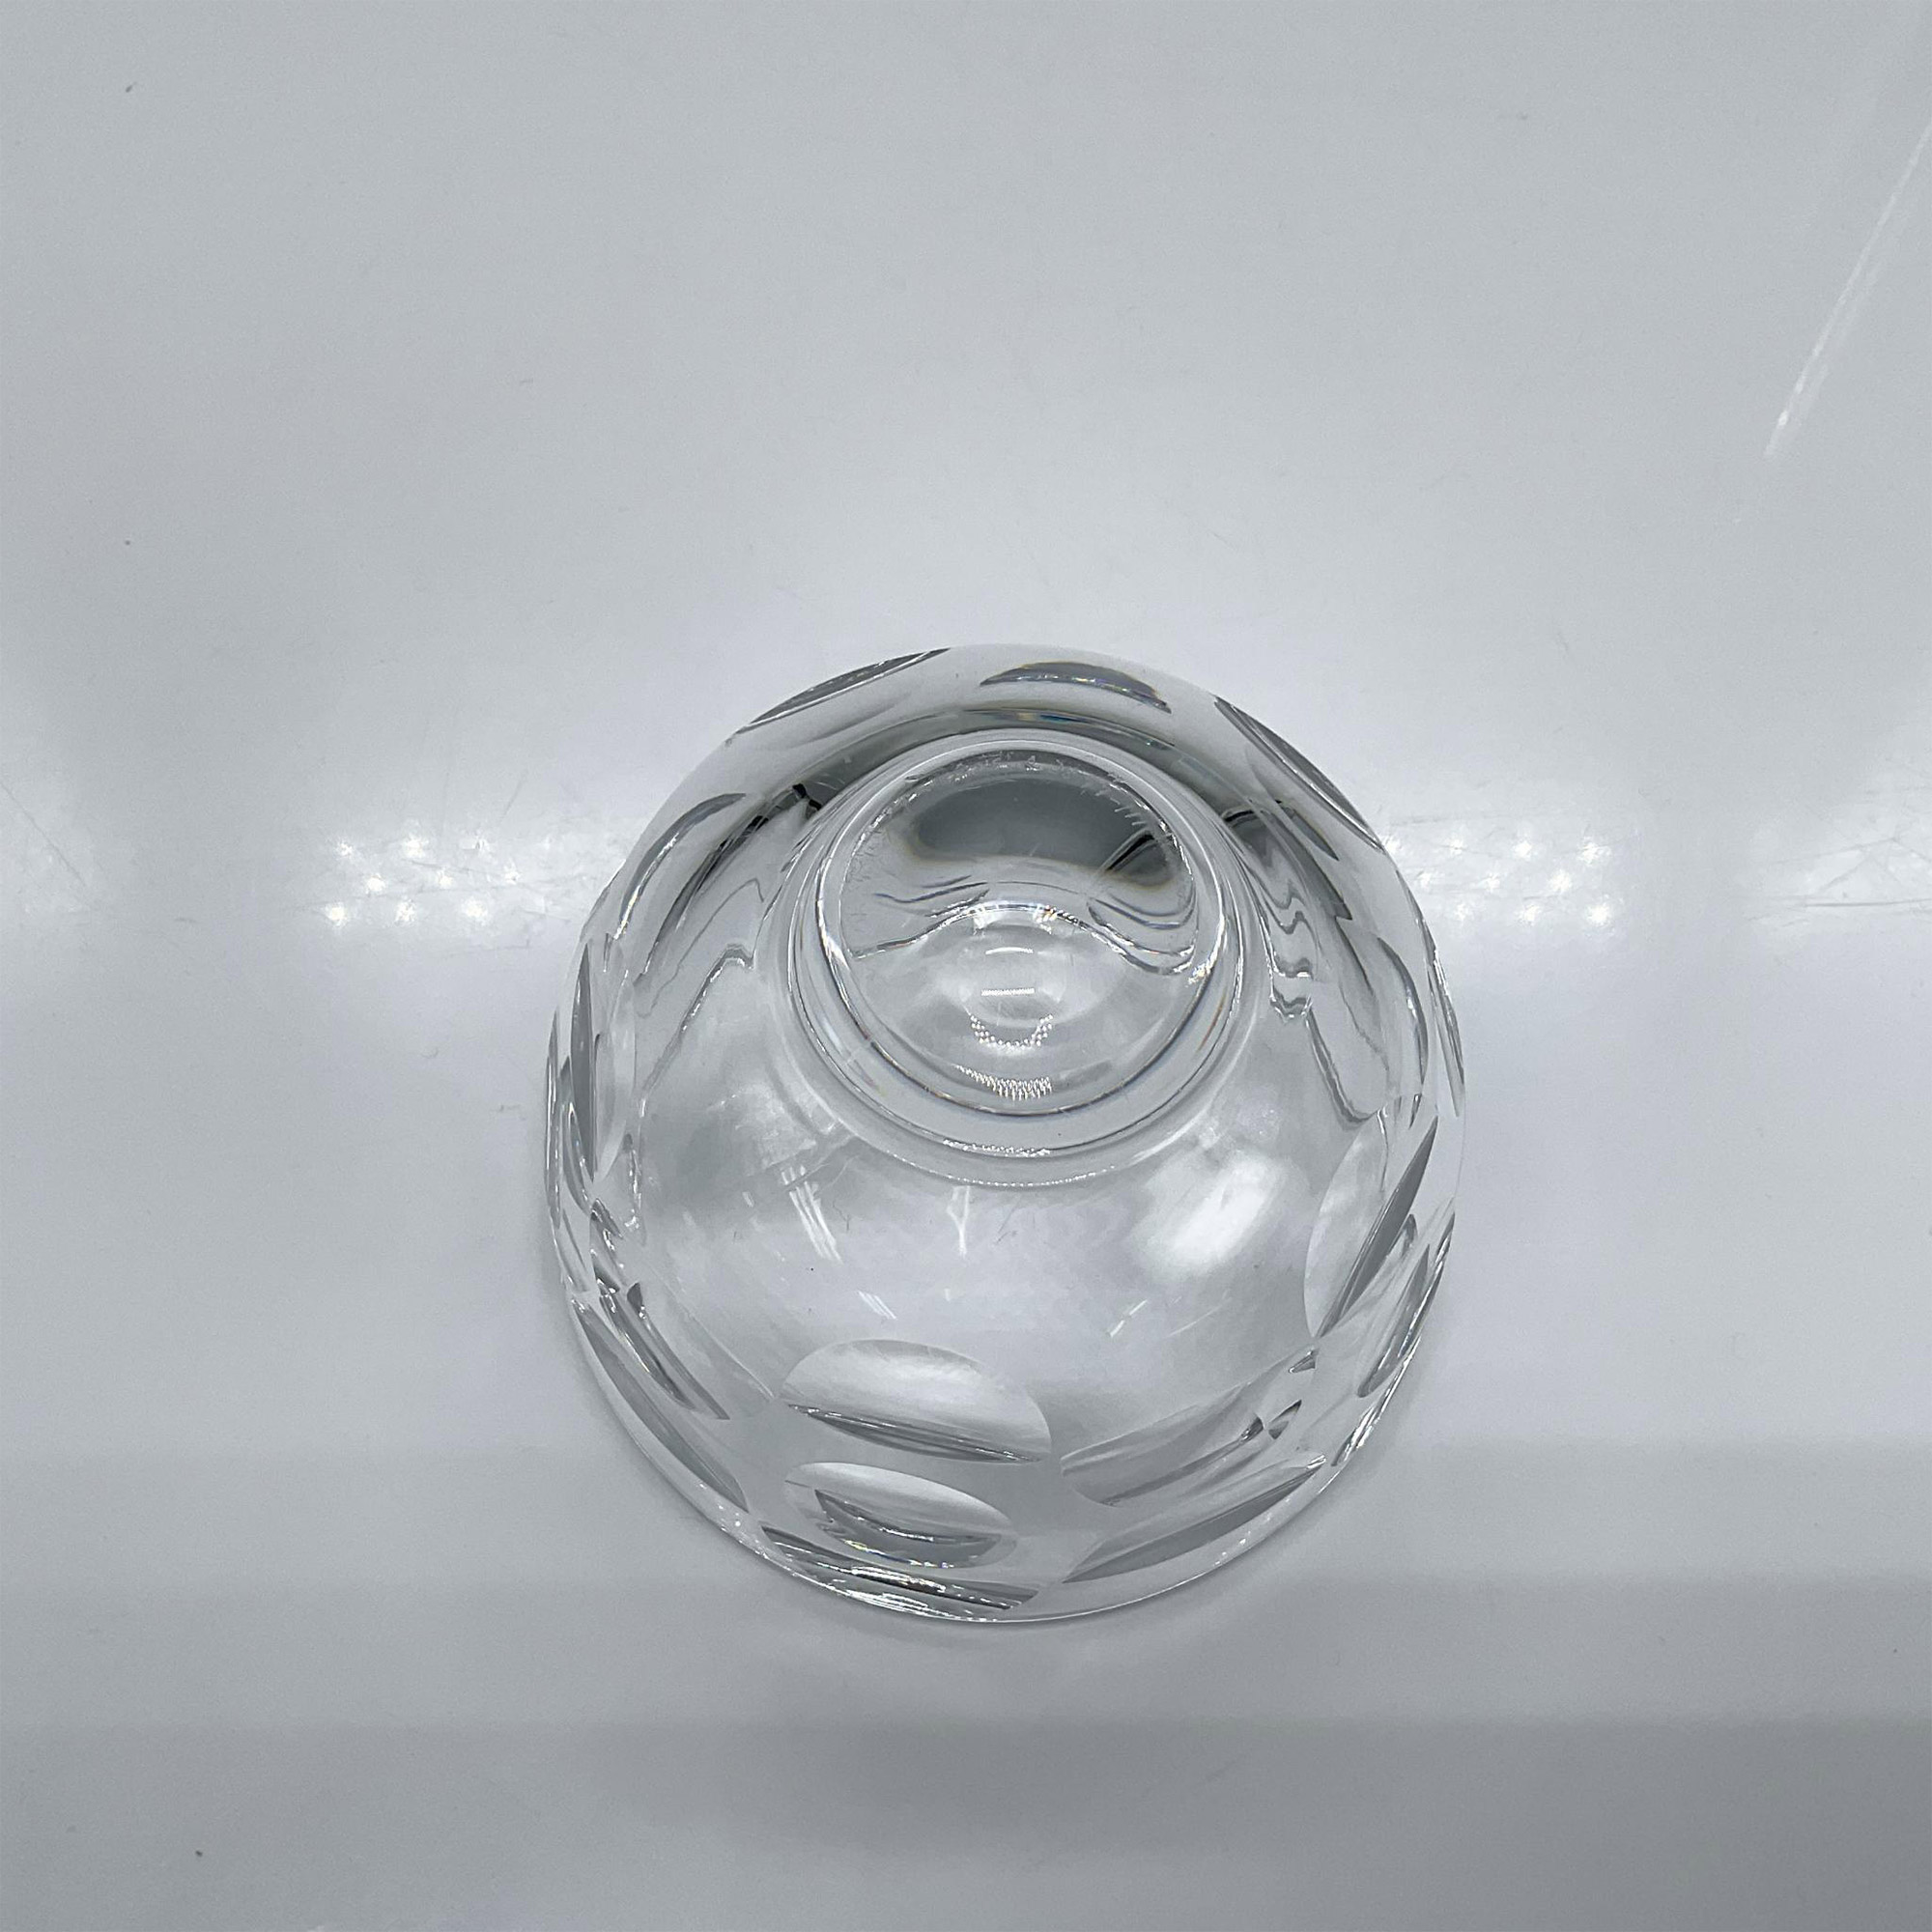 Orrefors Crystal Bowl, Swirl and Dots - Image 3 of 3